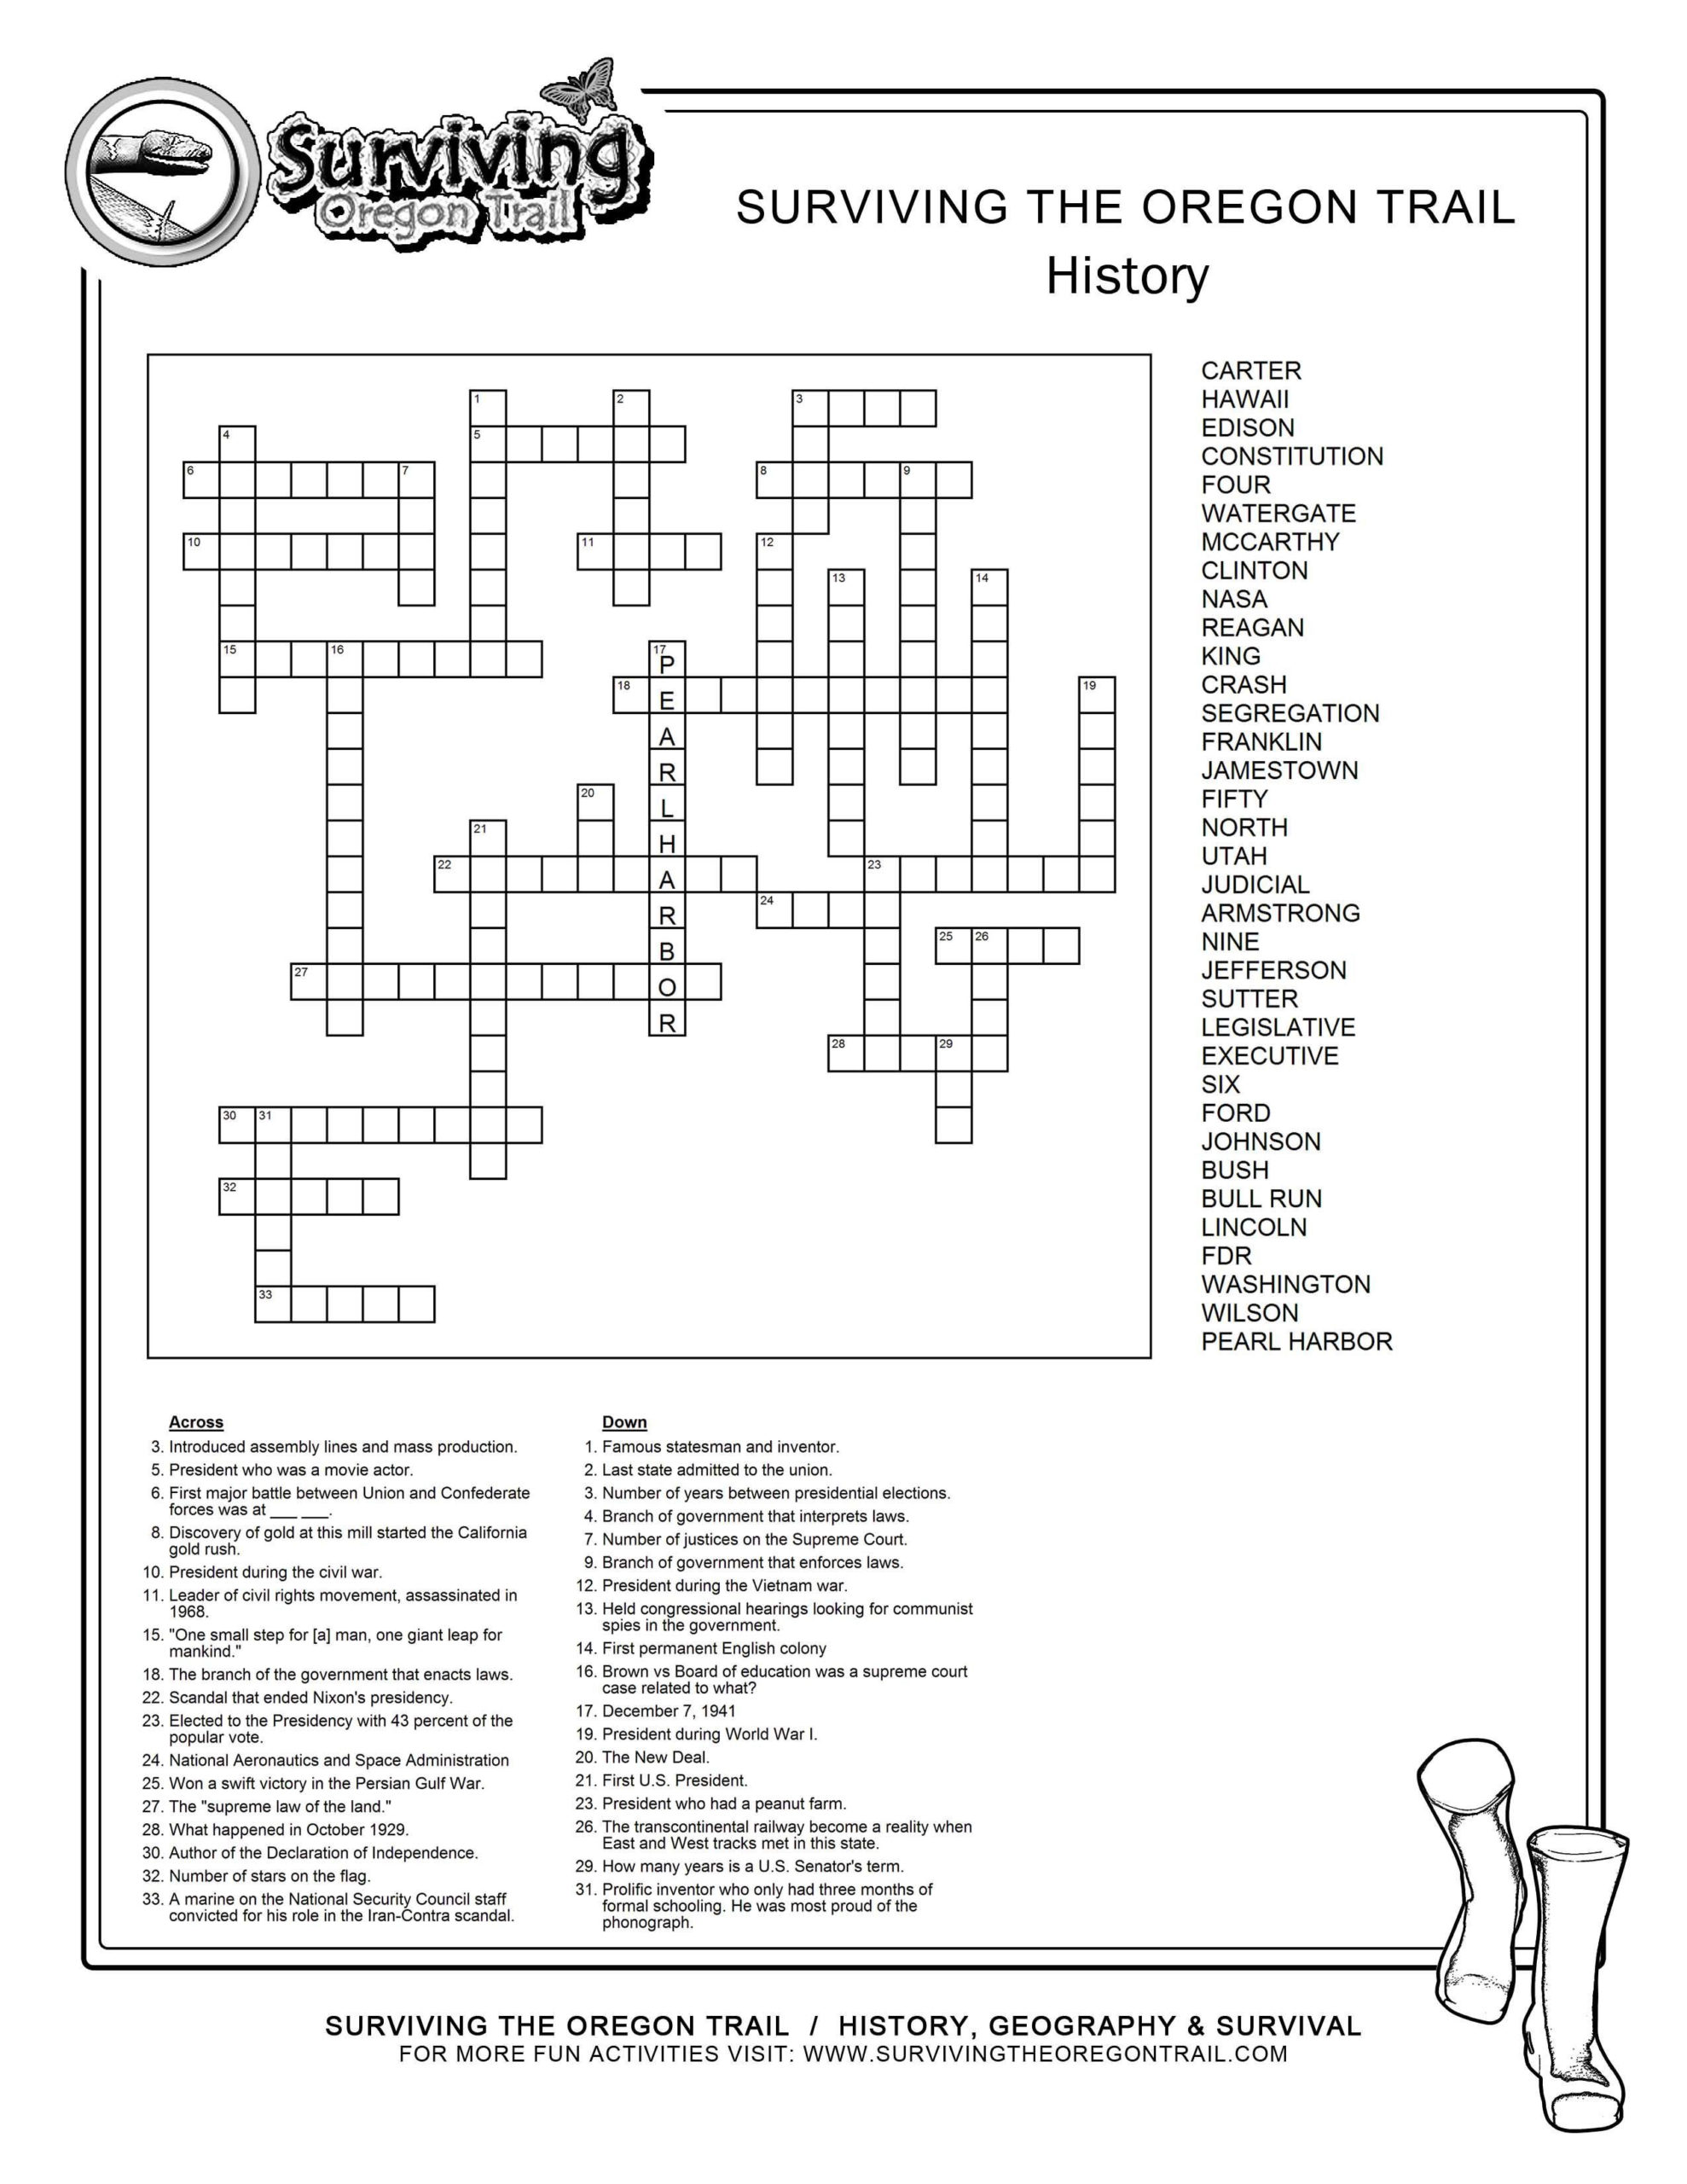 Crossword Puzzles Printable 6th Grade History With Words Bank